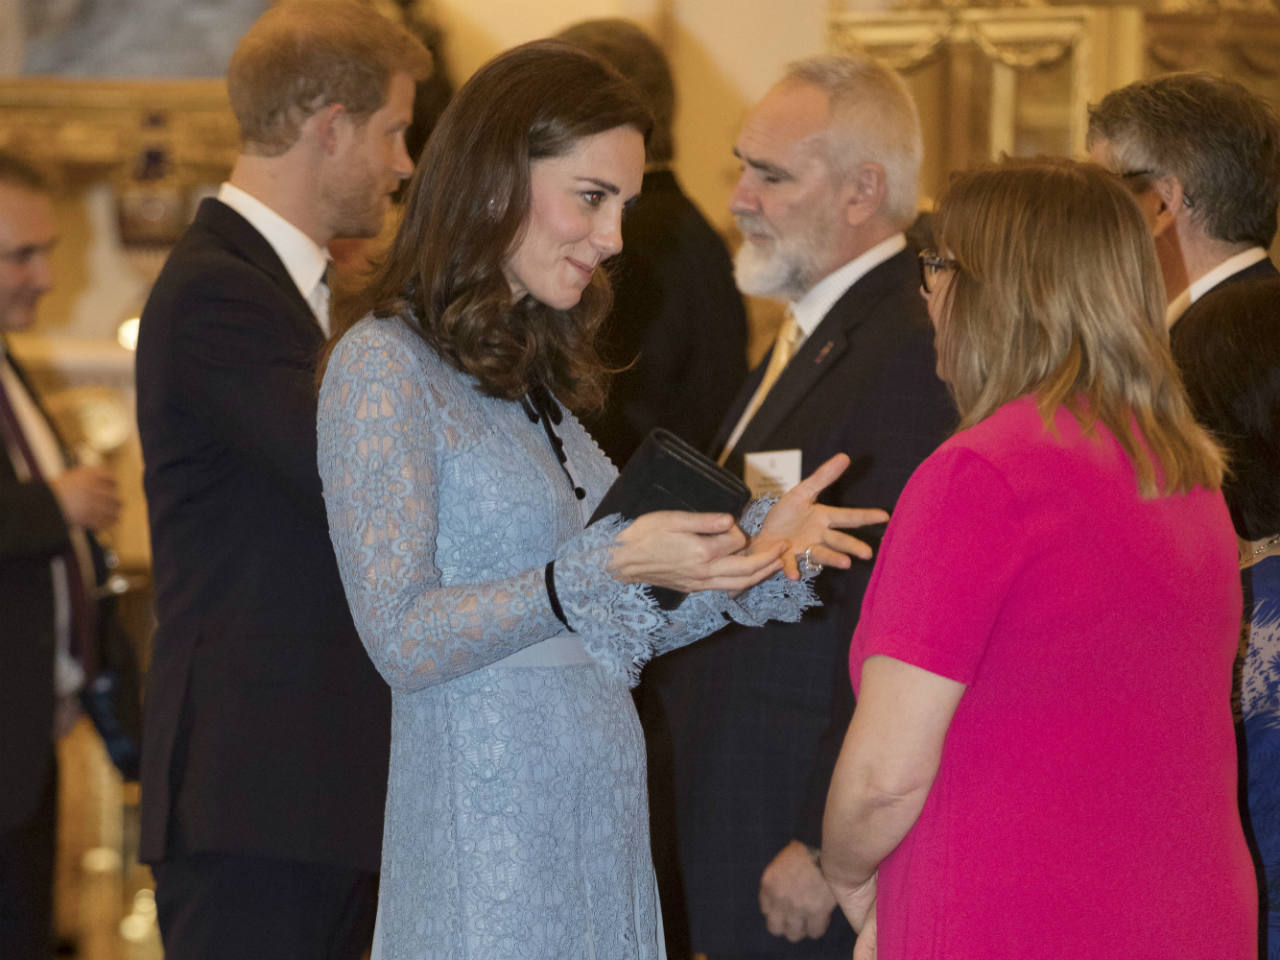 Kate Middleton showing off her baby bump